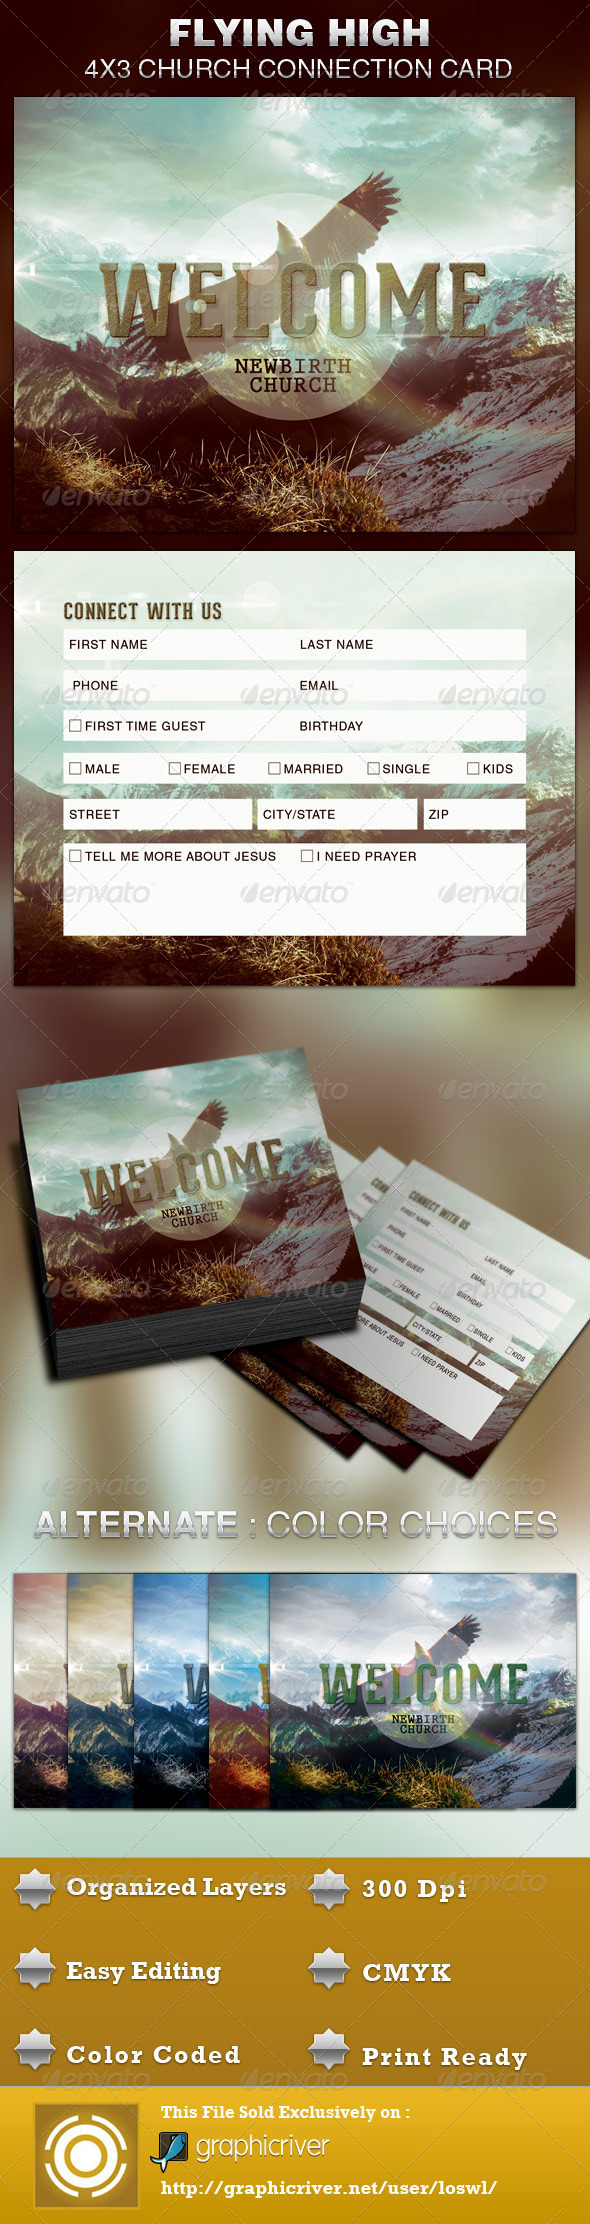 Summit Card Designs & Invite Templates From Graphicriver Pertaining To Decision Card Template